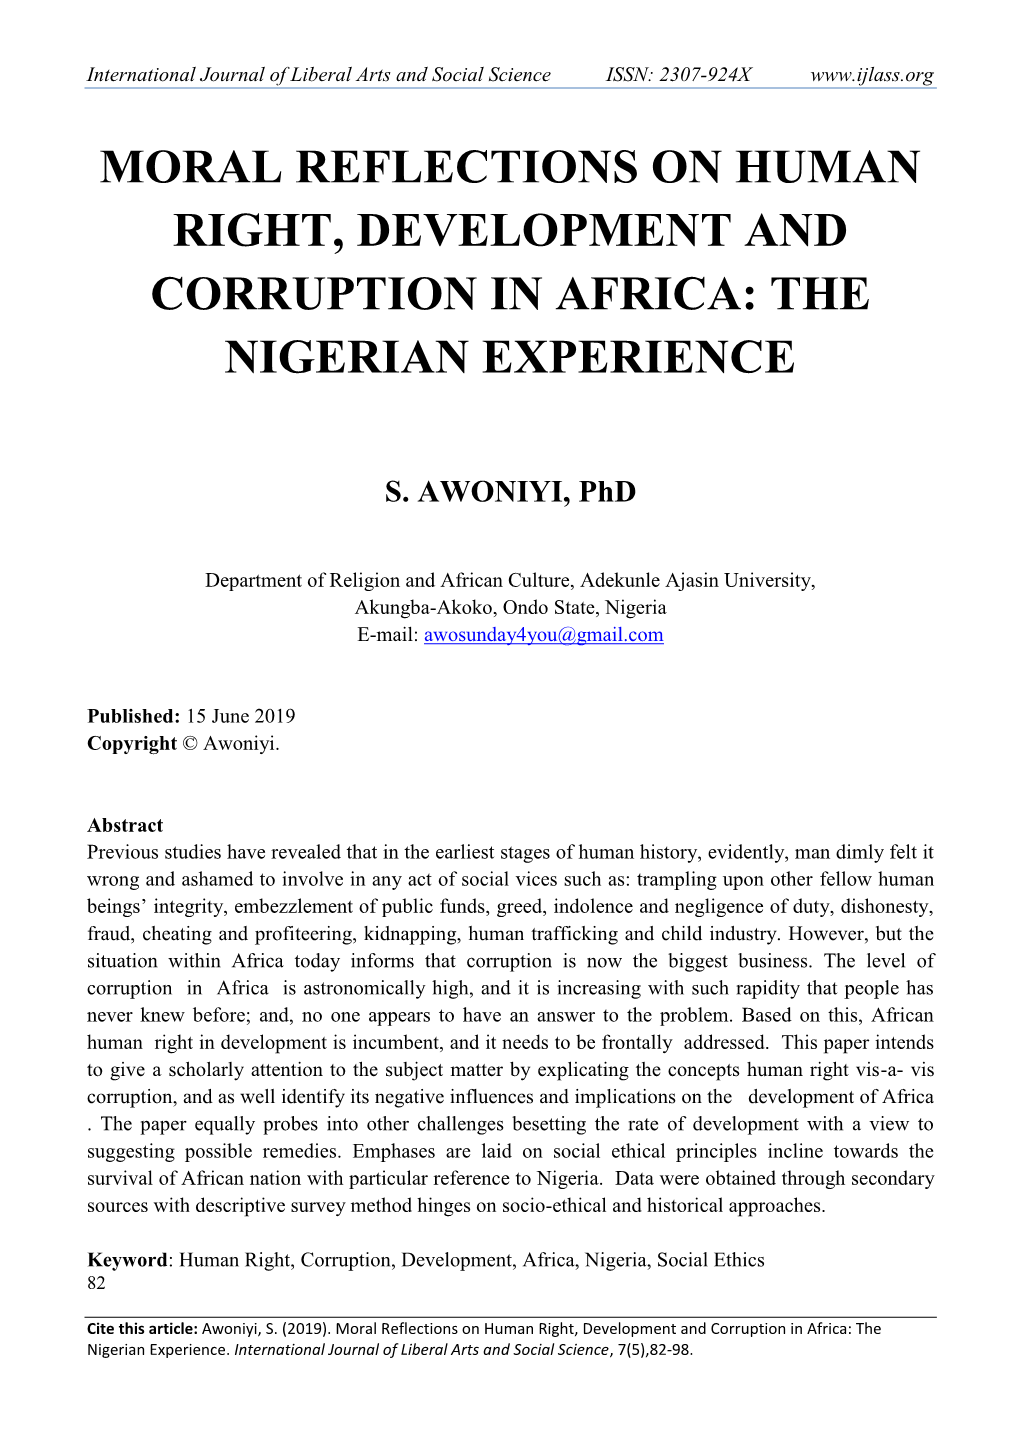 Moral Reflections on Human Right, Development and Corruption in Africa: the Nigerian Experience